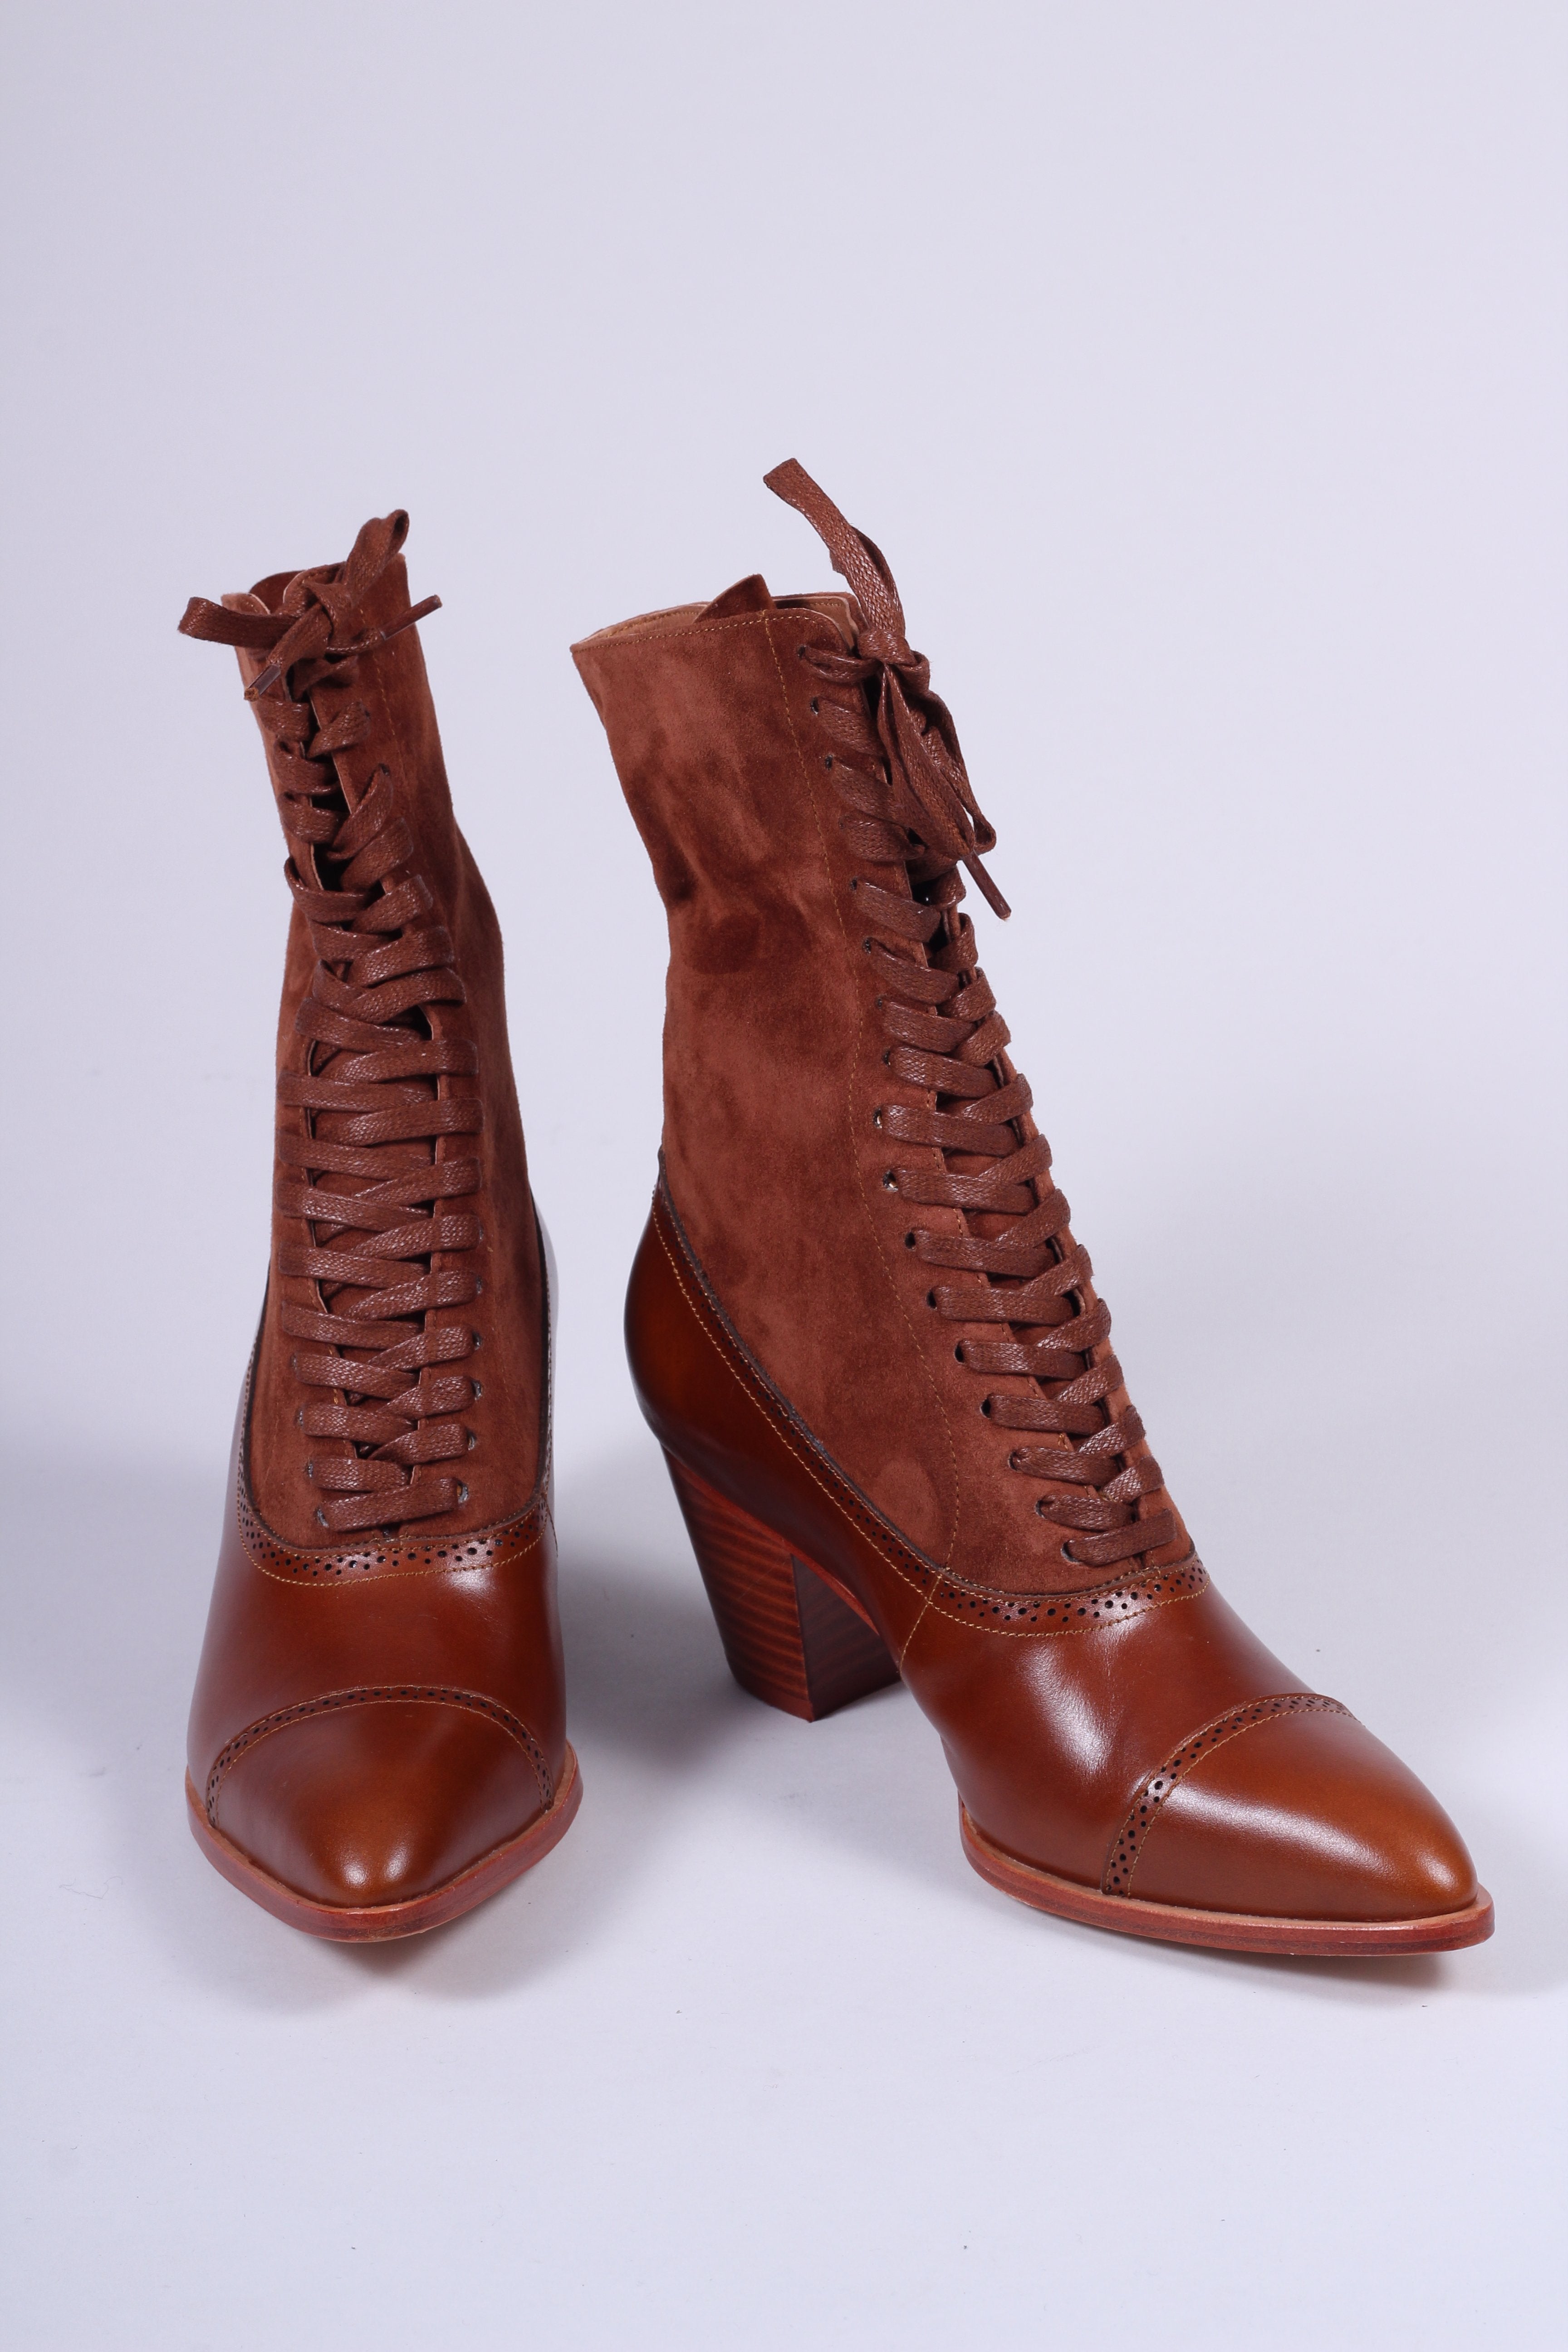 Edwardian style boots, 1900-1910 - brown - Victoria